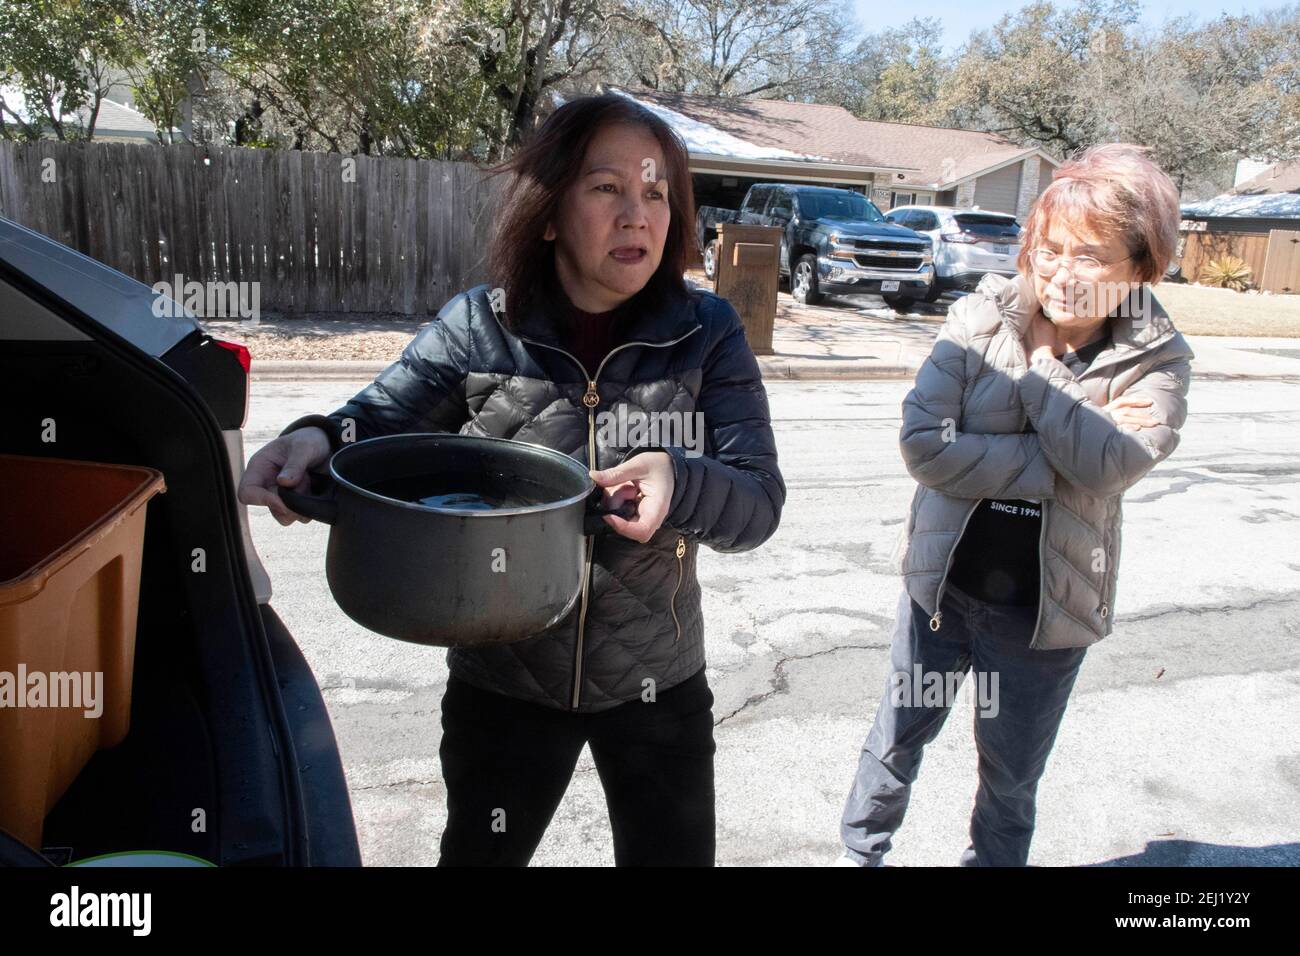 Austin, Texas USA Feb. 20, 2021: Homeowner Hank Lam carries a pot of water from the rear of a friend's SUV heading toward her house during a water emergency in central Texas. Unusually low temperatures caused frozen and broken water pipes throughout the area, leaving residents without running water and sending them scrambling for potable water. Credit: Bob Daemmrich/Alamy Live News Stock Photo